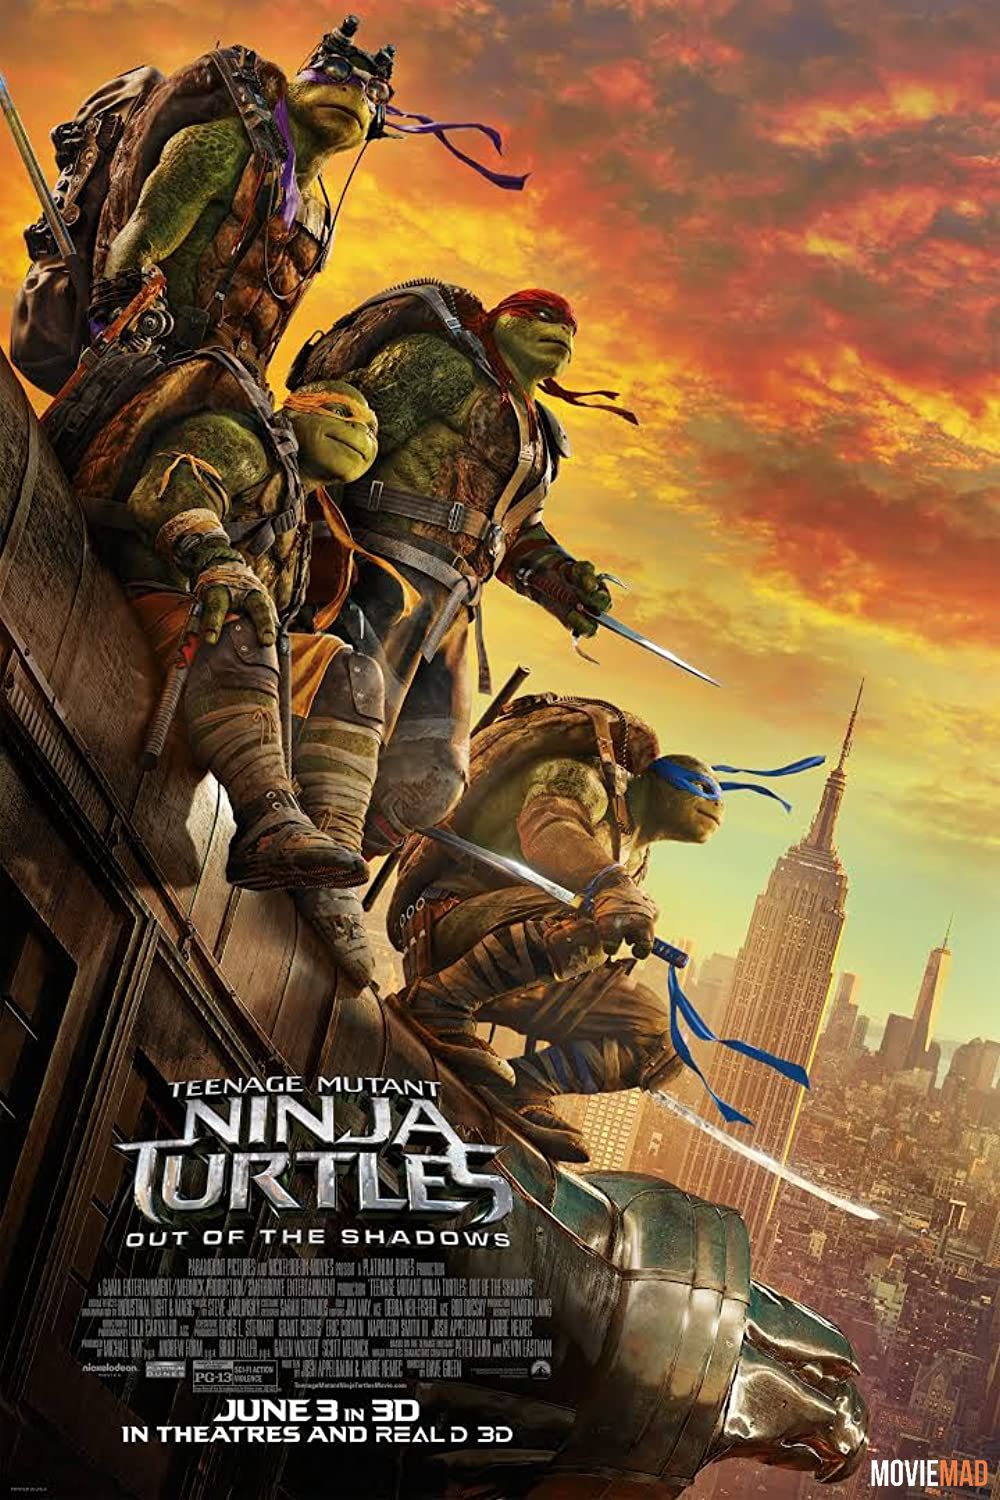 Teenage Mutant Ninja Turtles Out of the Shadows 2016 Hindi Dubbed BluRay Full Movie 720p 480p Movie download